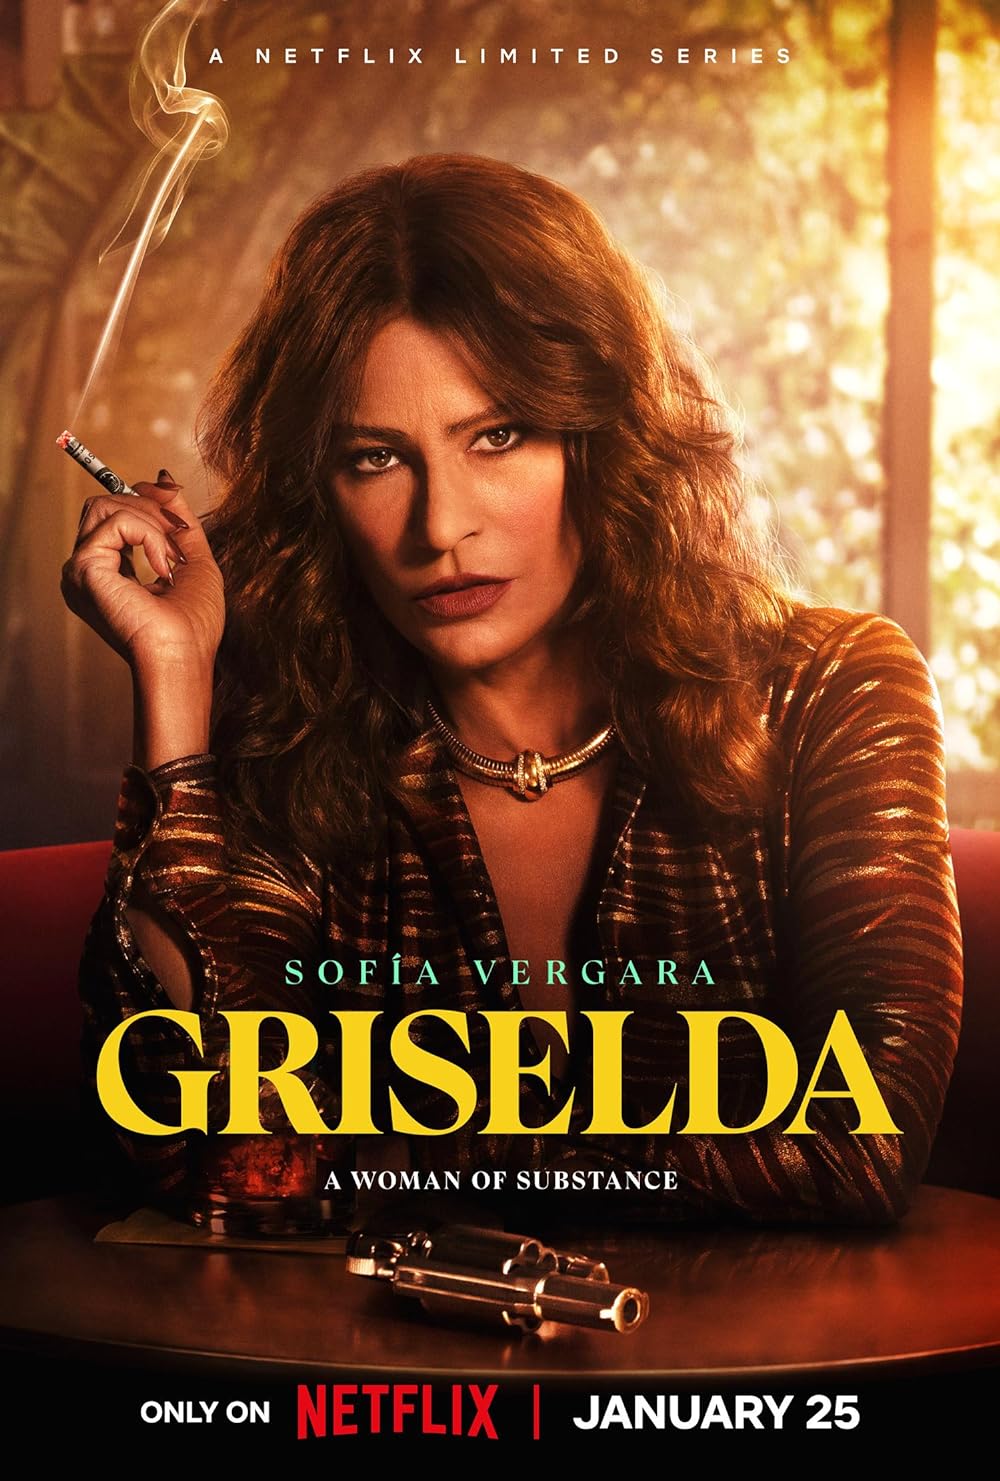 Griselda (January 24) - Streaming on NetflixInspired by real events, 'Griselda' is a gripping drama set in 1970s and 1980s Miami, focusing on the life of Griselda Blanco, portrayed by Sofía Vergara. Griselda, a Colombian immigrant, rises from humble beginnings to become the city’s most feared cocaine dealer, earning the name ‘La Madrina’ or ‘The Godmother.’ The narrative delves into her complex persona, charting her rise in a male-dominated industry as she gradually descends into ruthlessness and violence.